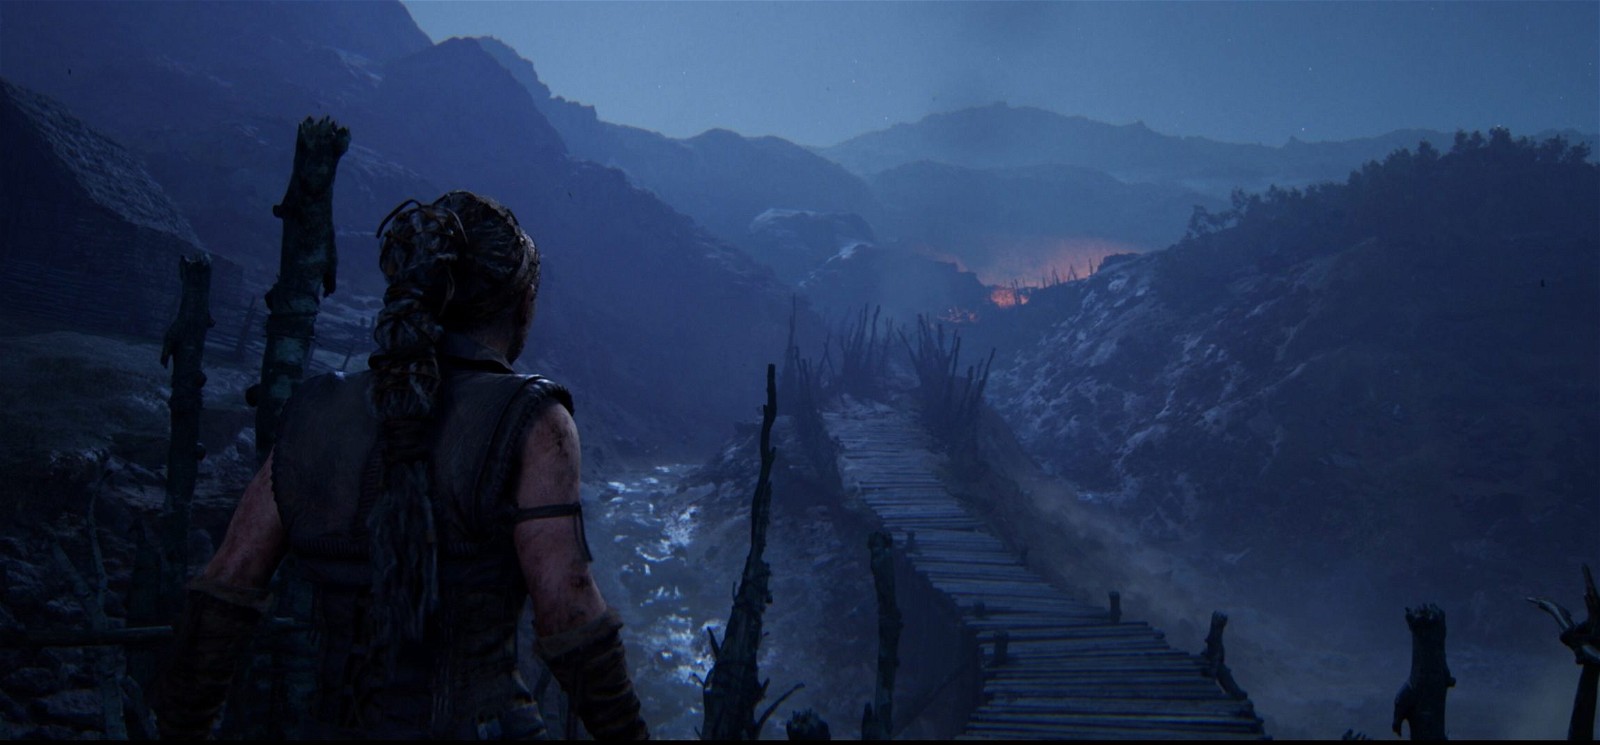 Hellblade 2 graphics ready to raise the bar